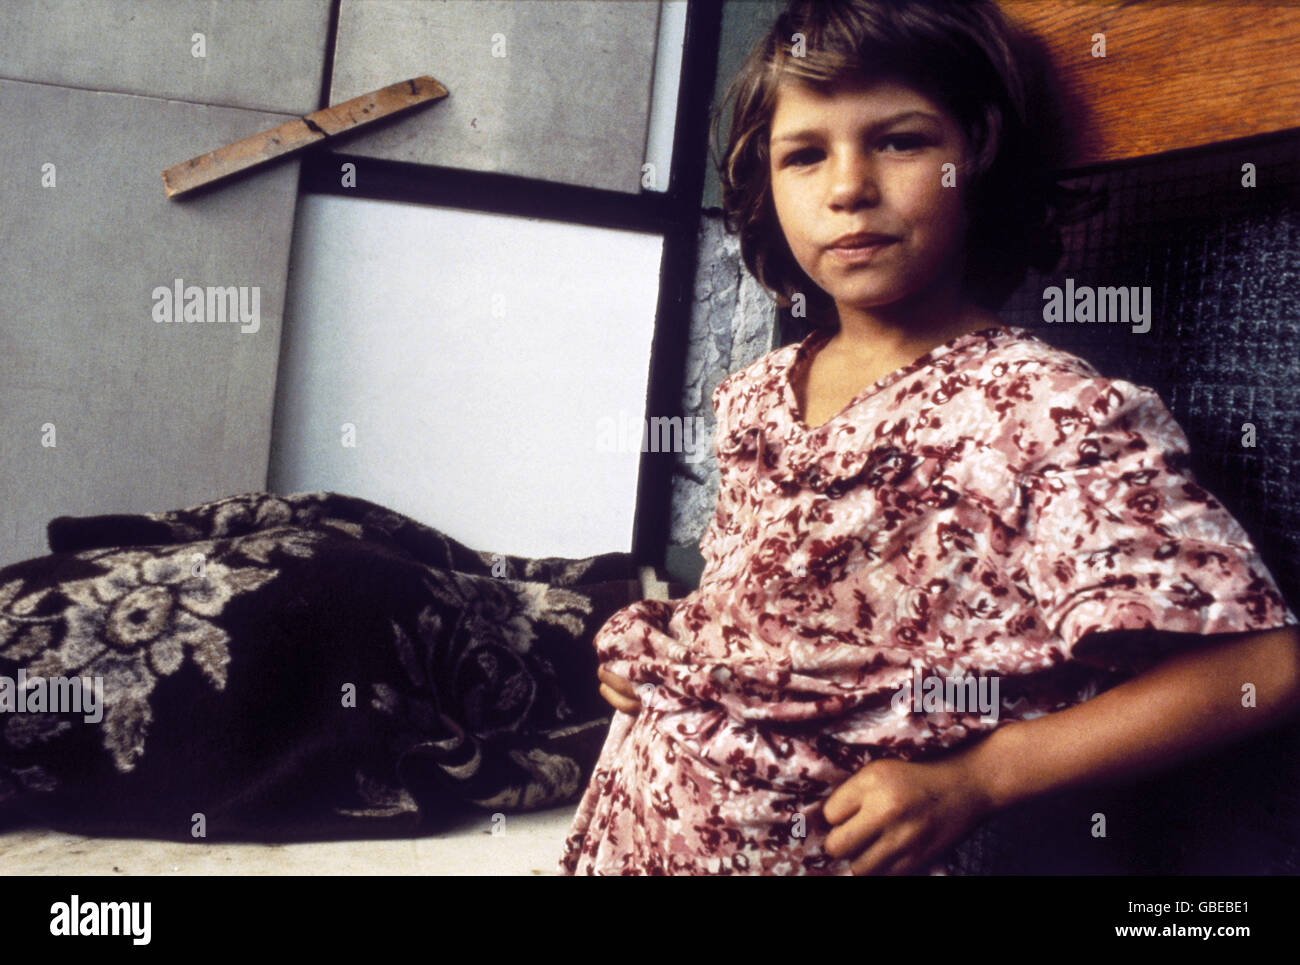 events, Croatian War of Independence 1991 - 1995, girl in the Karlovac refugee camp, Croatia, August 1992, Yugoslavia, Yugoslav Wars, Balkans, conflict, people, misery, 1990s, 90s, 20th century, historic, historical,_NOT, Additional-Rights-Clearences-Not Available Stock Photo